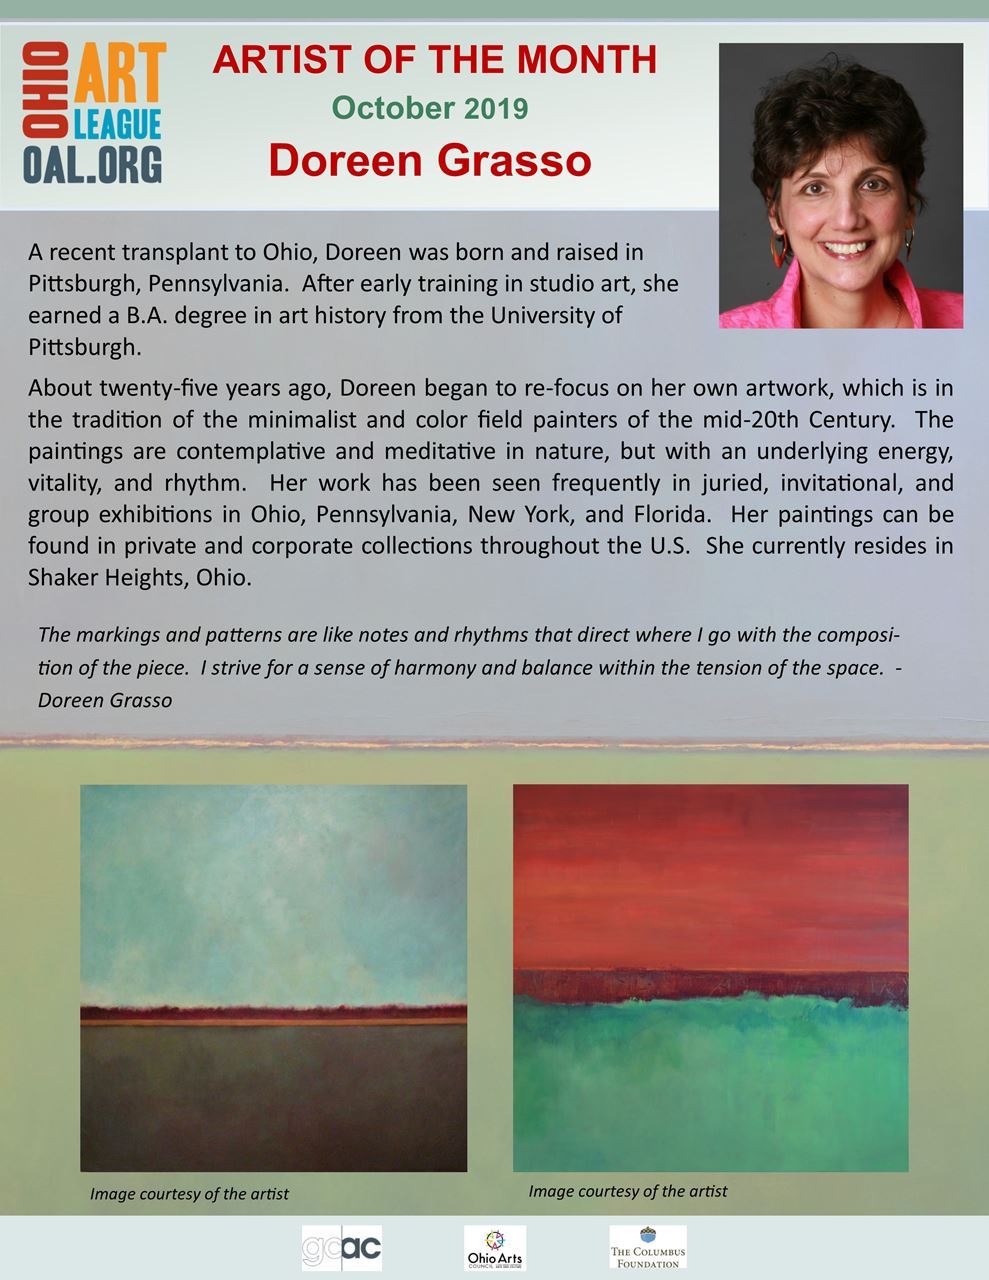 Artist of the month October 2019 Doreen Grasso.  A recent transplant to Ohio, doreen was born and raised in Pittssburgh, Pennsylvania.  After early training in studio art, she earned a BA degree in art history from the University of Pittsburgh. About Twenty-five years ago, Doreen began to re-focus on her own artwork, which is in the tradition of the minimalist and color field painters of the mid-20th century. the paintings are contemplative and meditative in nature, but with an underlying energy, vitality and rhythm. Her work has been seen frequently in juried, invitational, and group exhibitions in Ohio, Pennsylvania, New York, and Florida. her paintings can be found in private and corporate collections throughtout the US. she currently resides in Shaker Heights, Ohio.  "The markings and patterns are like notes and rhythms that direct where I go with the composition of the piece. I strive for a sense of harmony and balance withing the tension of the space." - Doreen Grasso